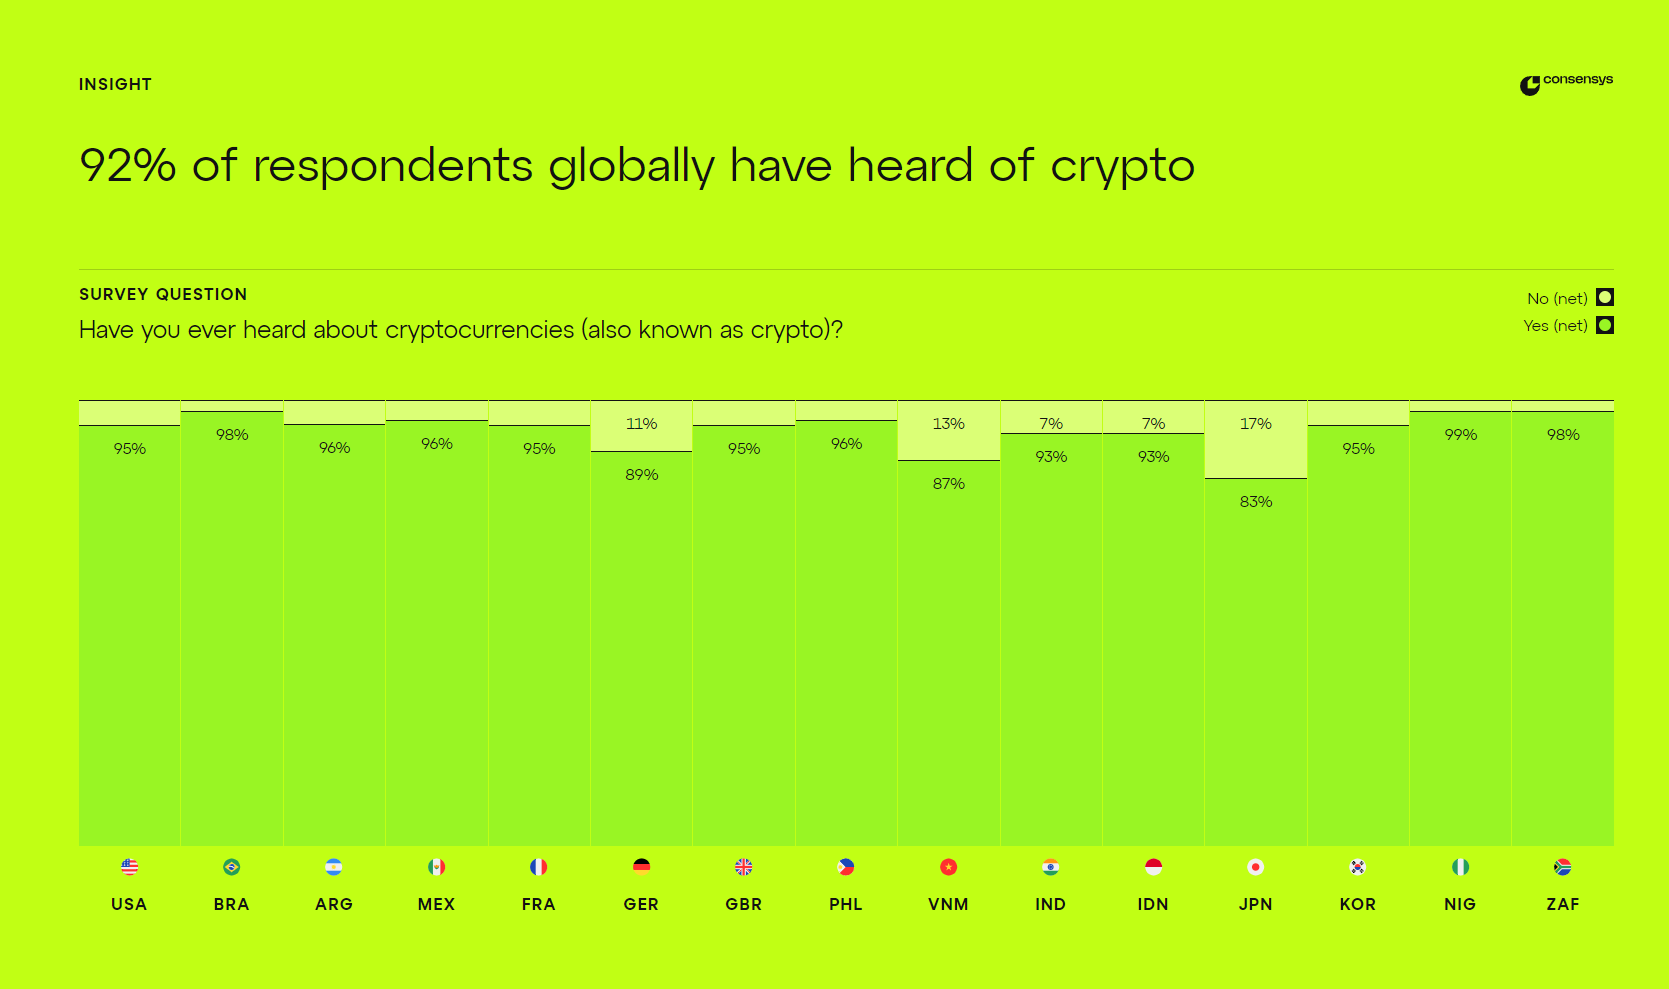 Nigeria Tops Global List for Cryptocurrency Awareness — Survey